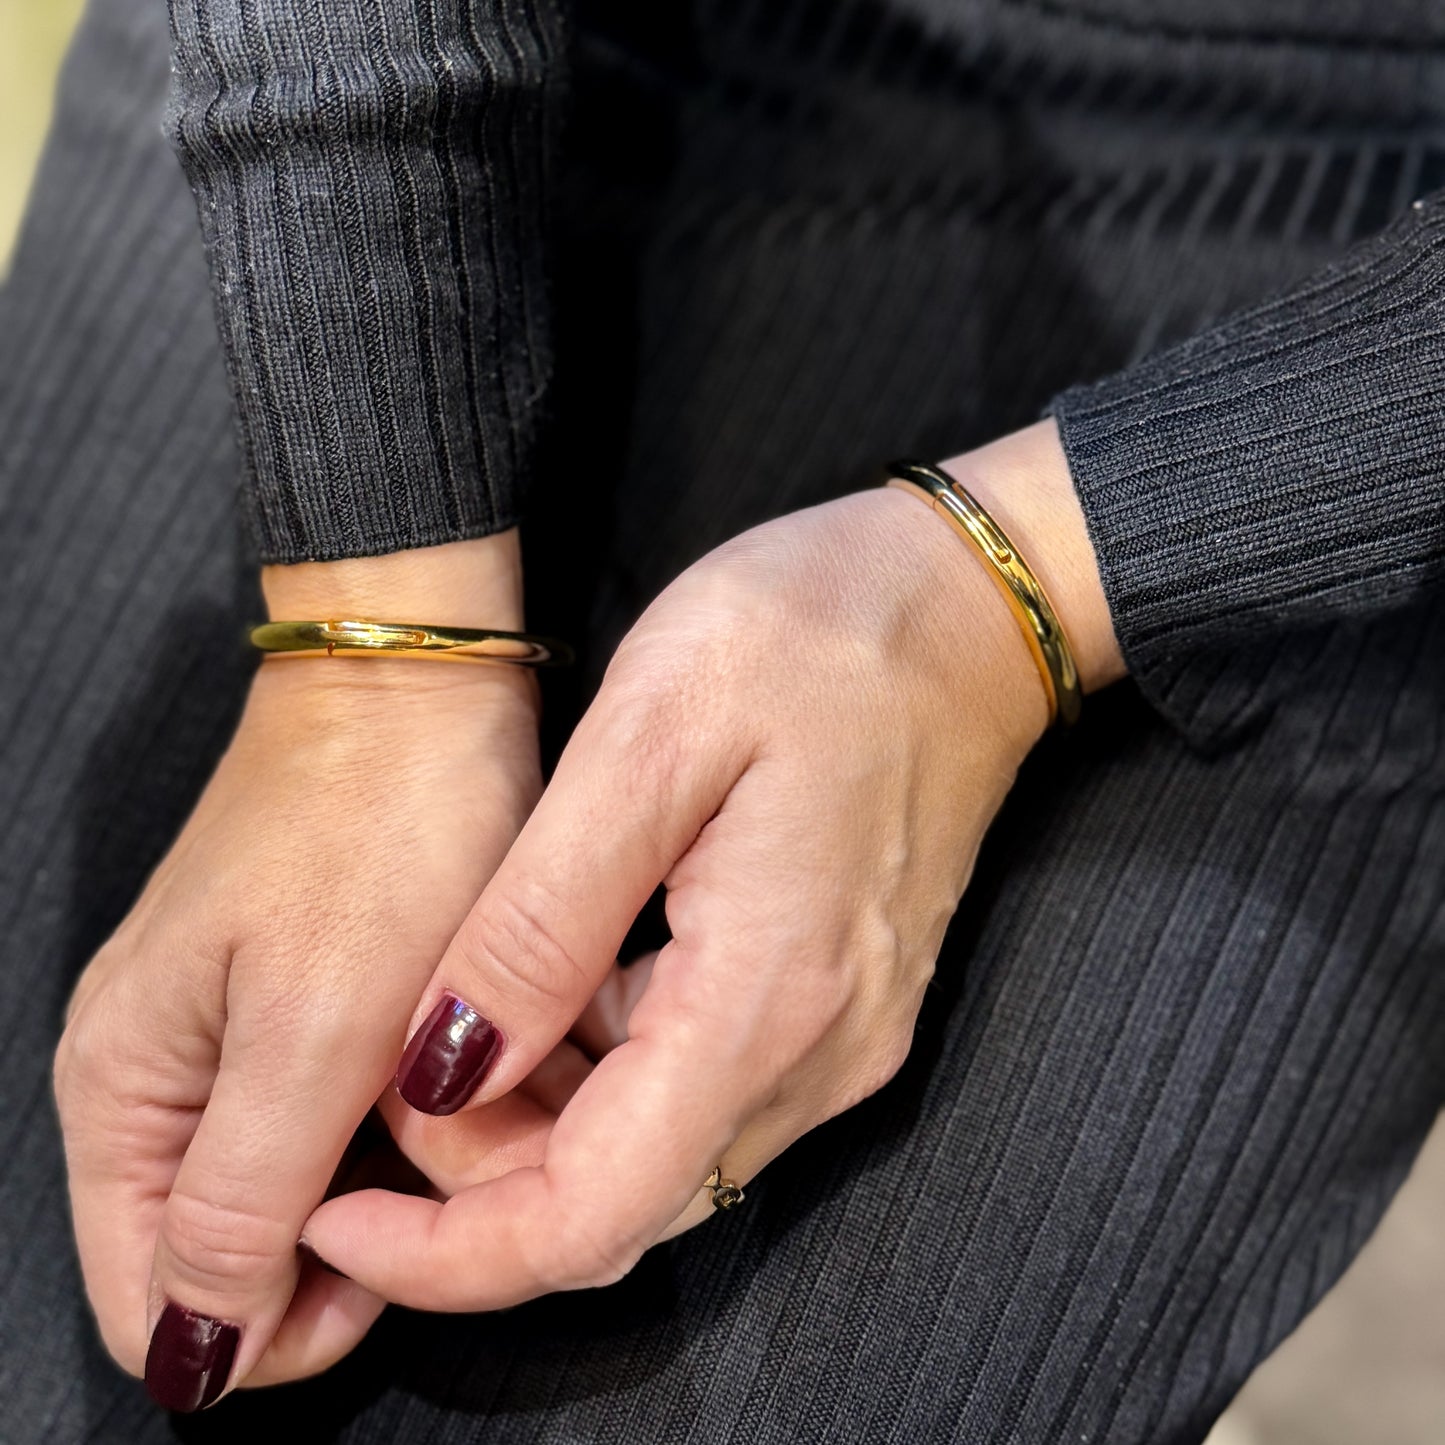 Thin locking jewelry bangles in black or polished gold with key